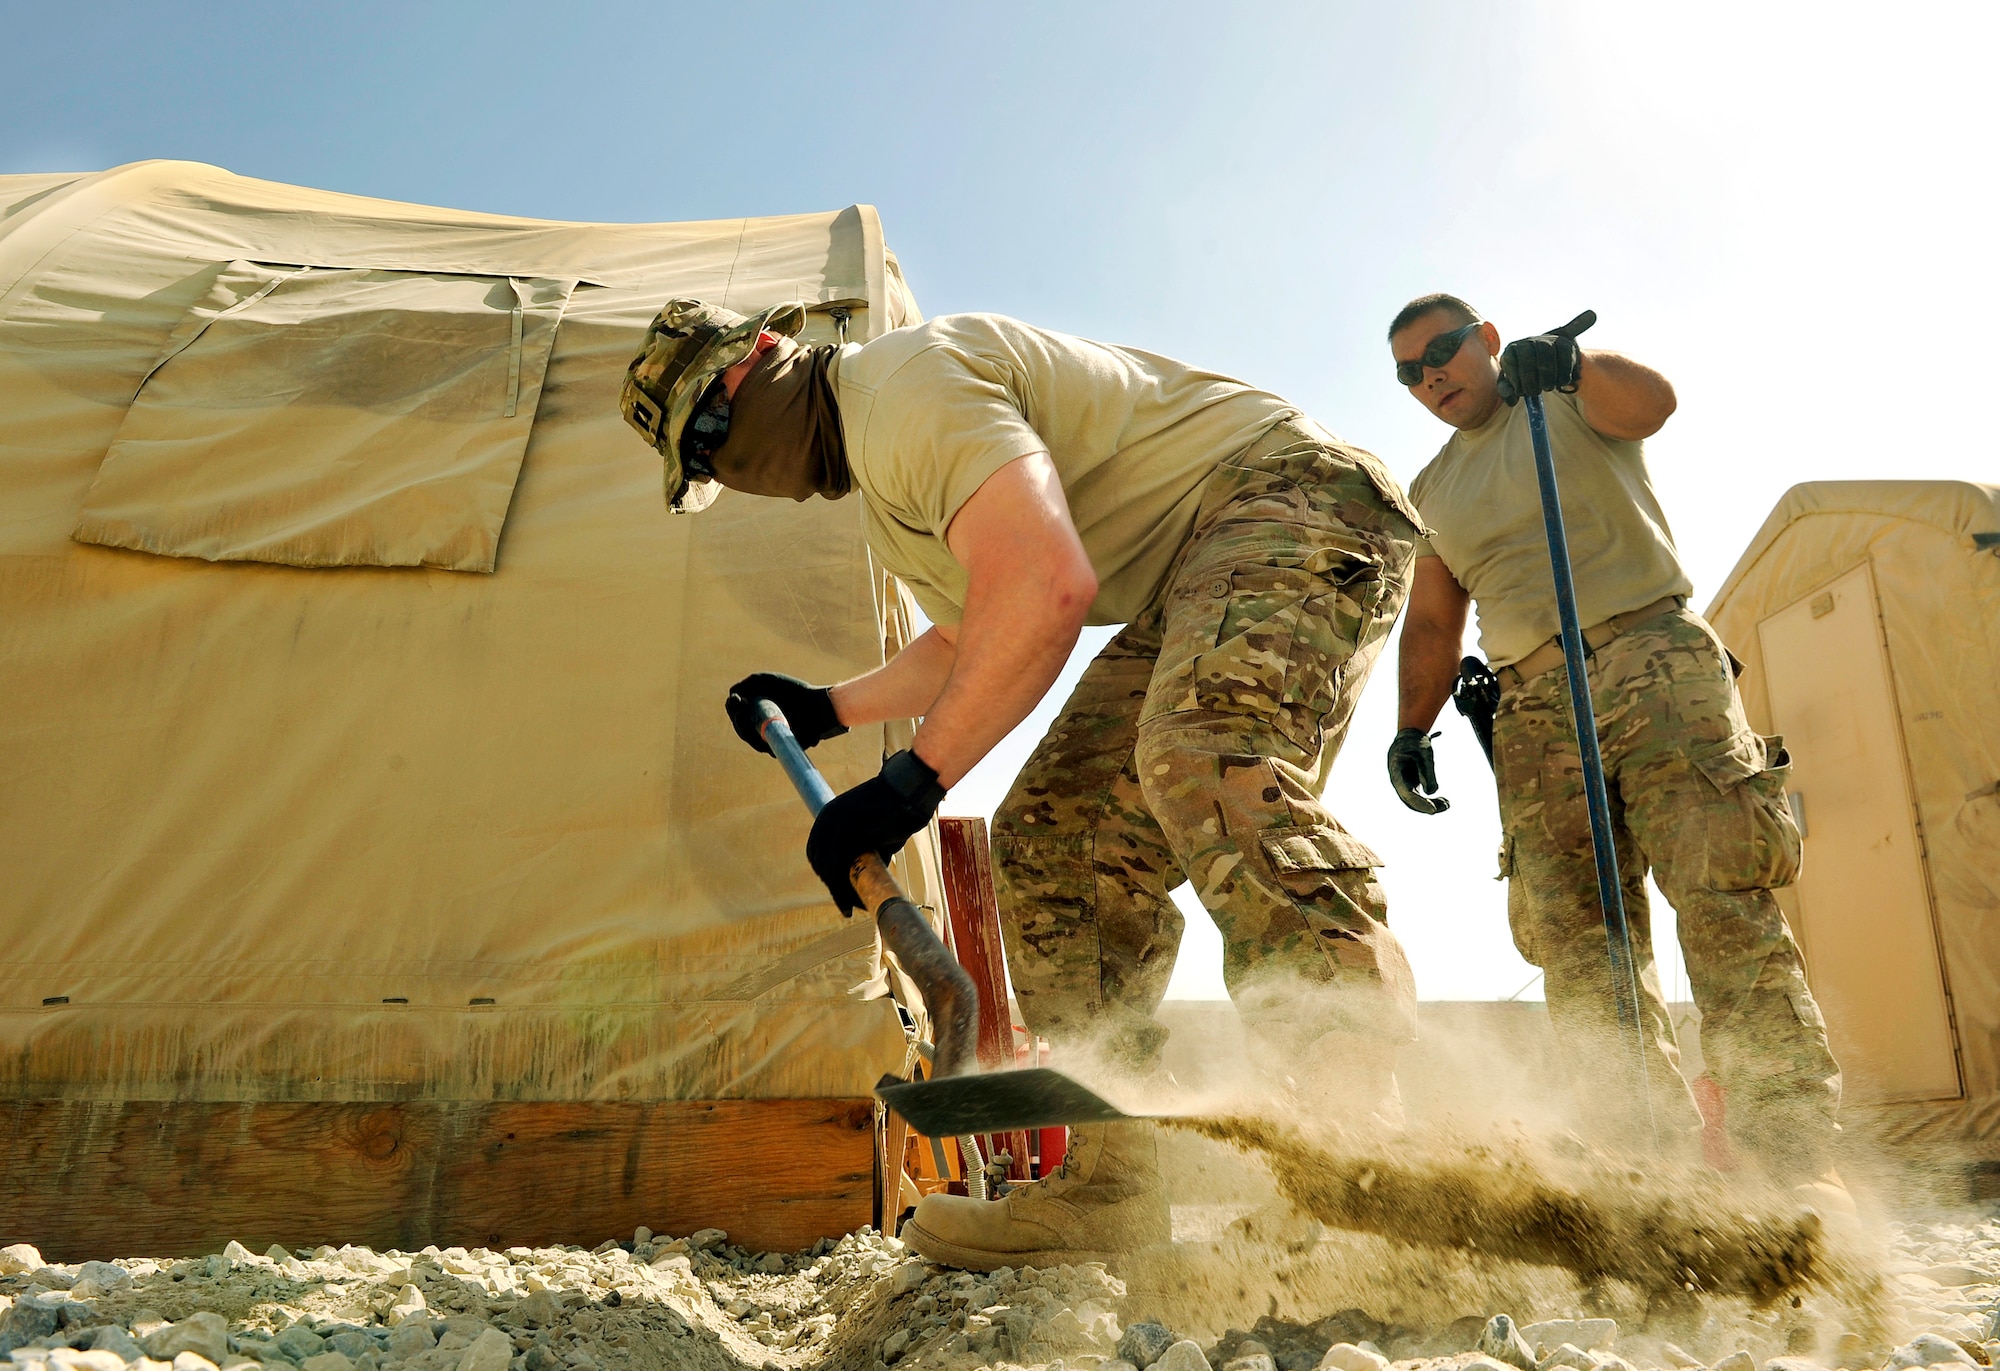 Capt. Wesley Parker, 455th Expeditionary Communications Squadron, operations flight commander, excavates trenches to hold conduit on Bagram Airfield, Afghanistan. The conduit will protect the fiber and copper cable running underground to the tents. He is deployed from Tinker Air Force Base, Okla., and a native of Humble, Texas. (U.S. Air Force photo/ Staff Sgt. Stephenie Wade)